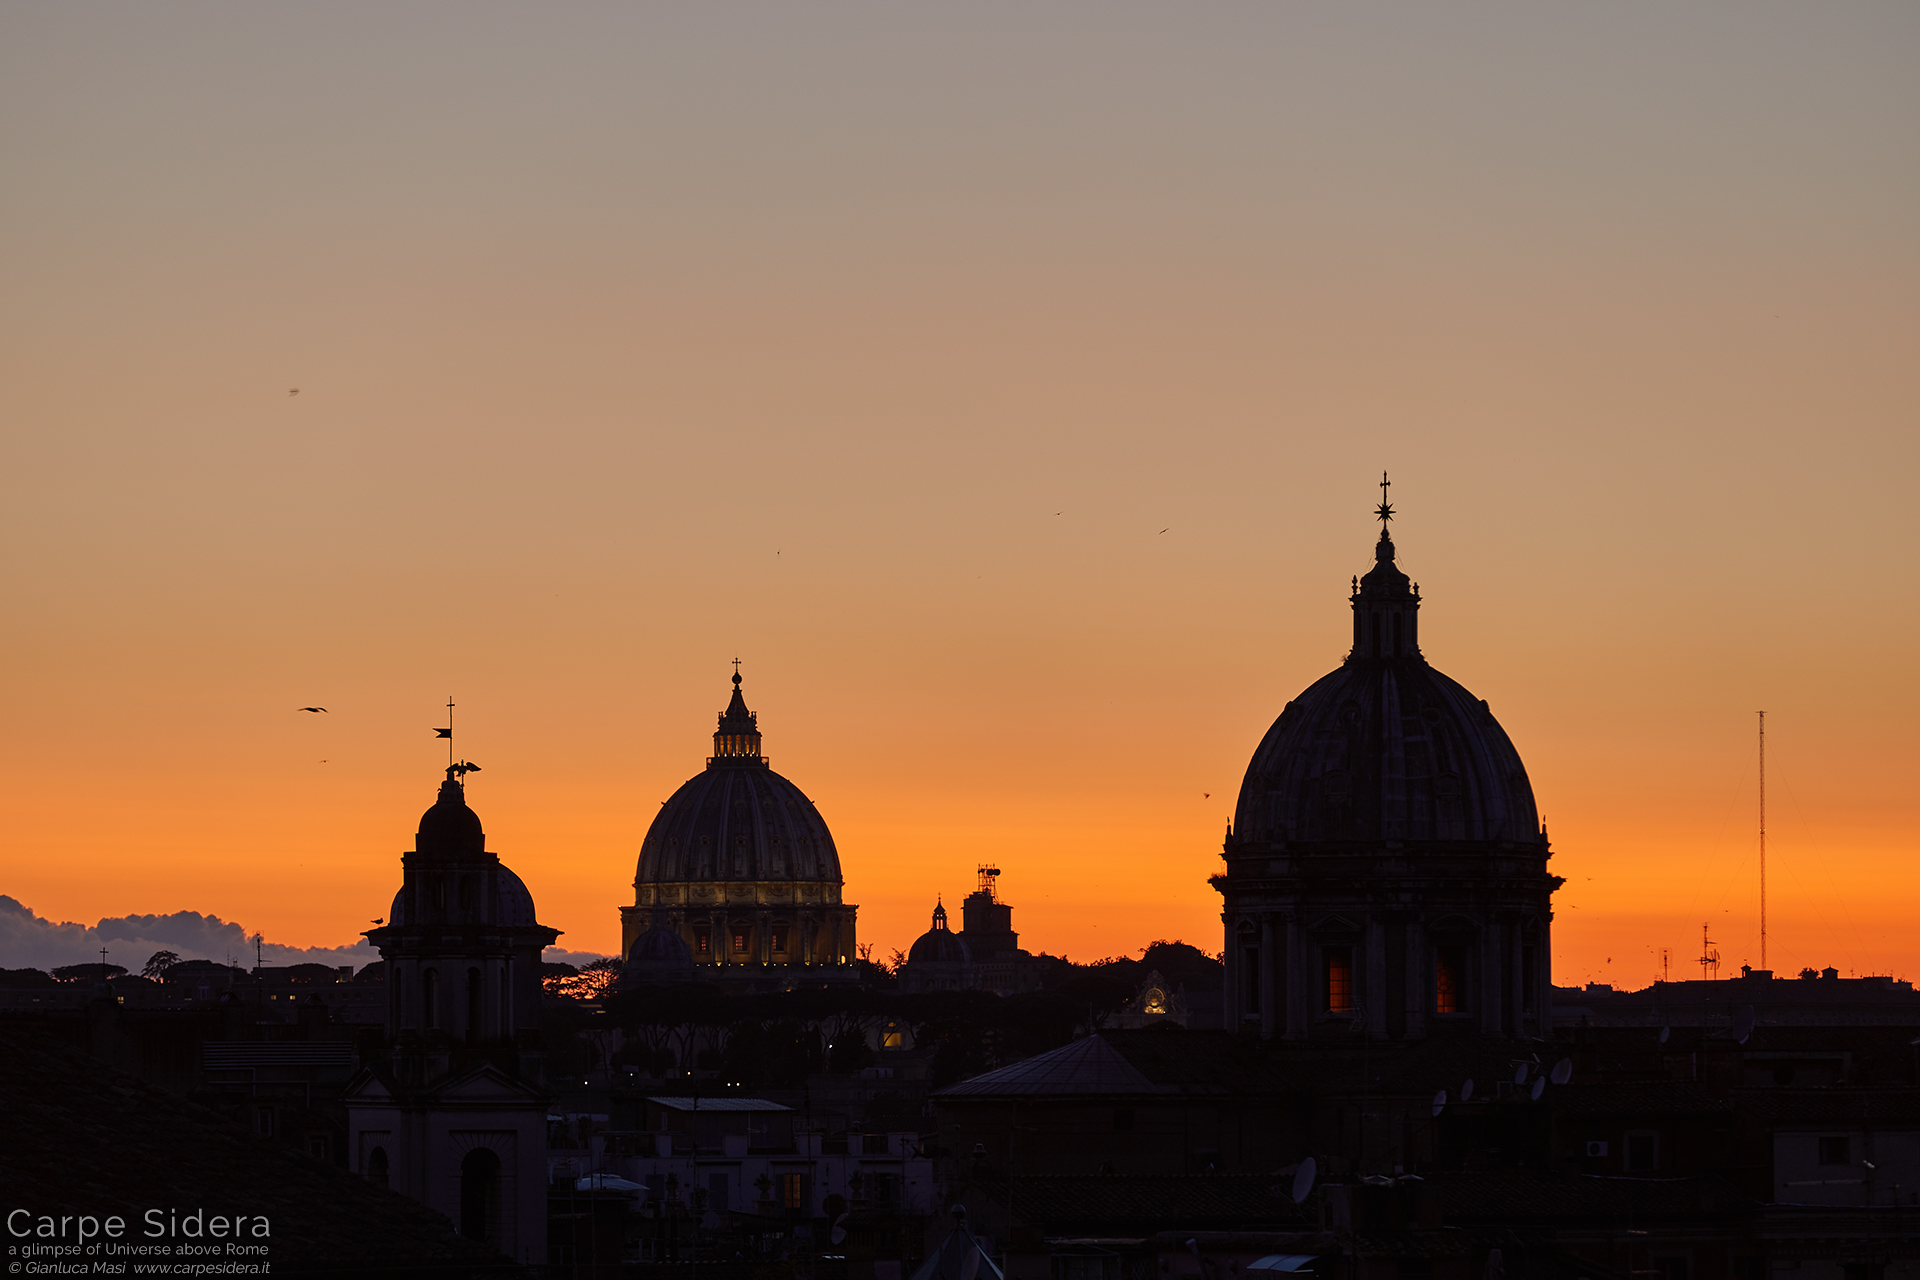 A close up to St. Peter's Dome (left) and Sant'Andrea della Valle (right)